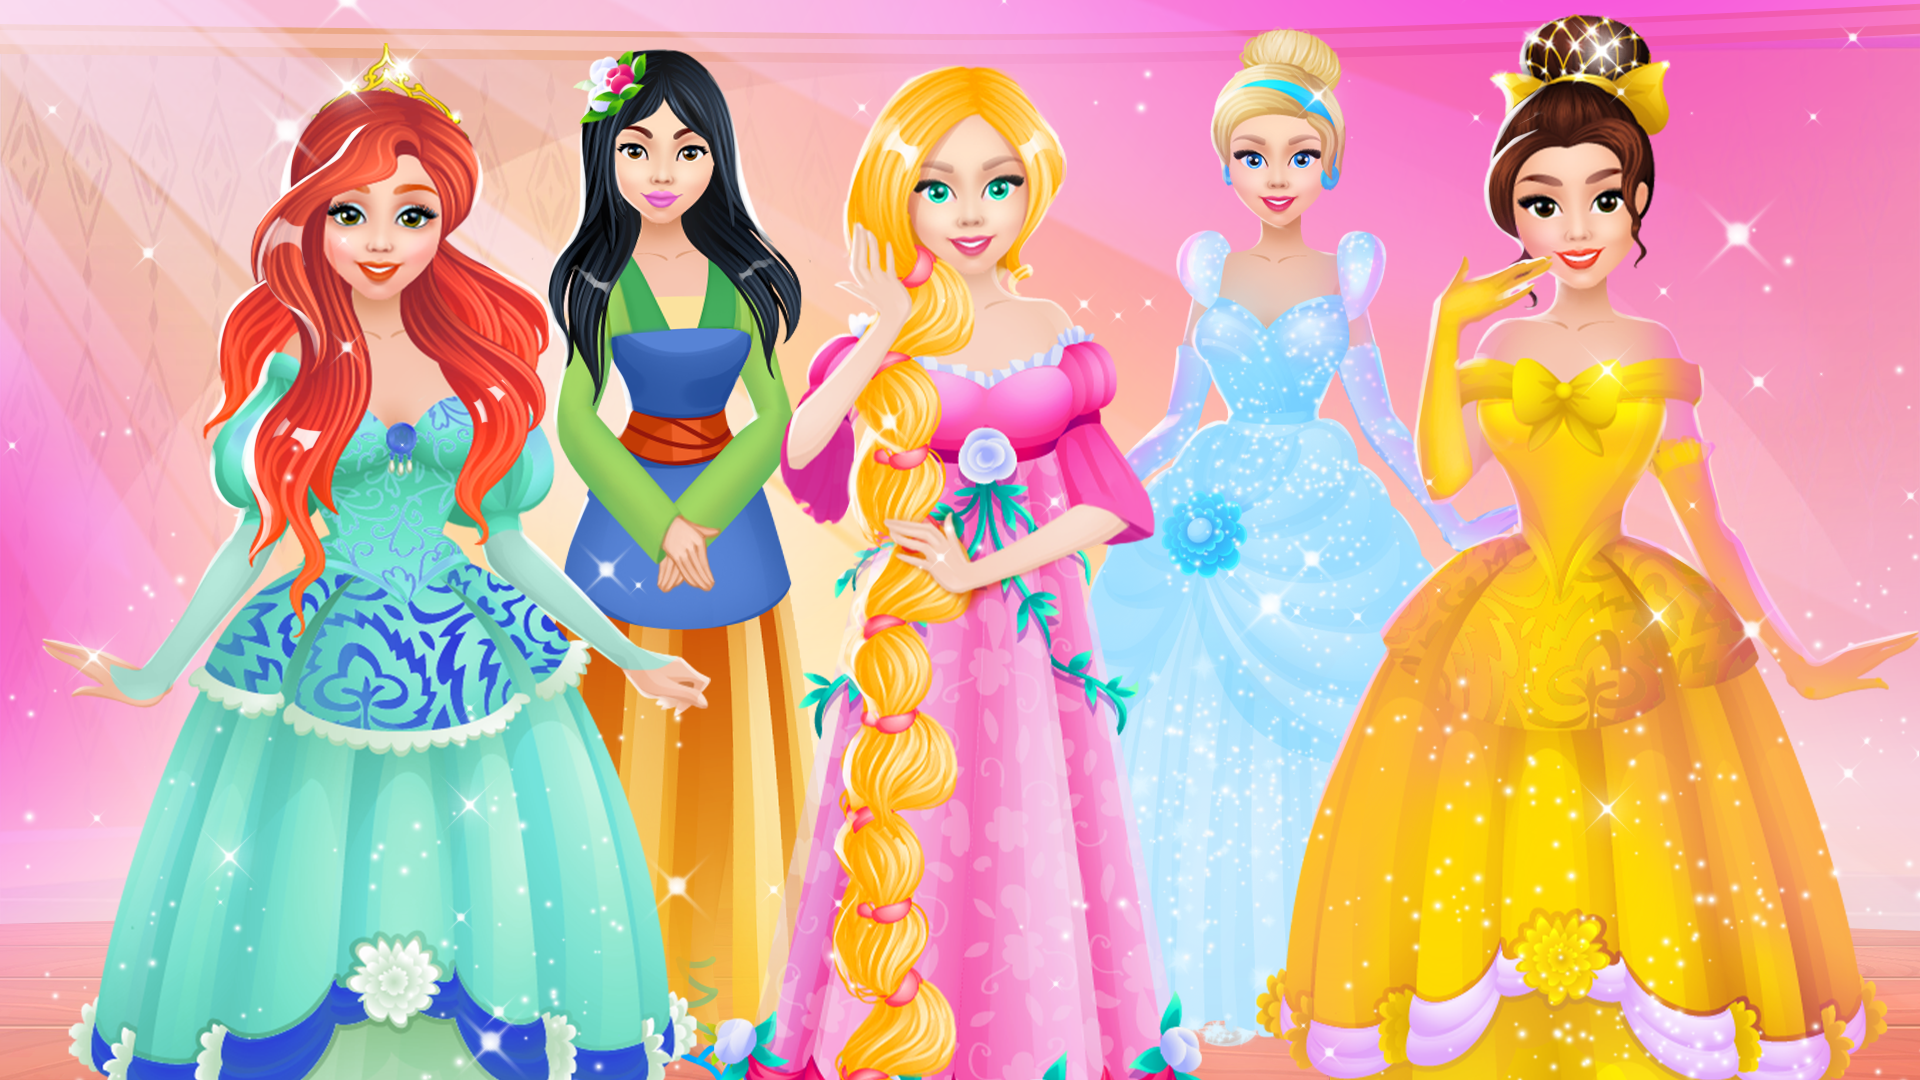 Prom Queen Dress Up Game - High School Rising Star:Amazon.com:Appstore for  Android